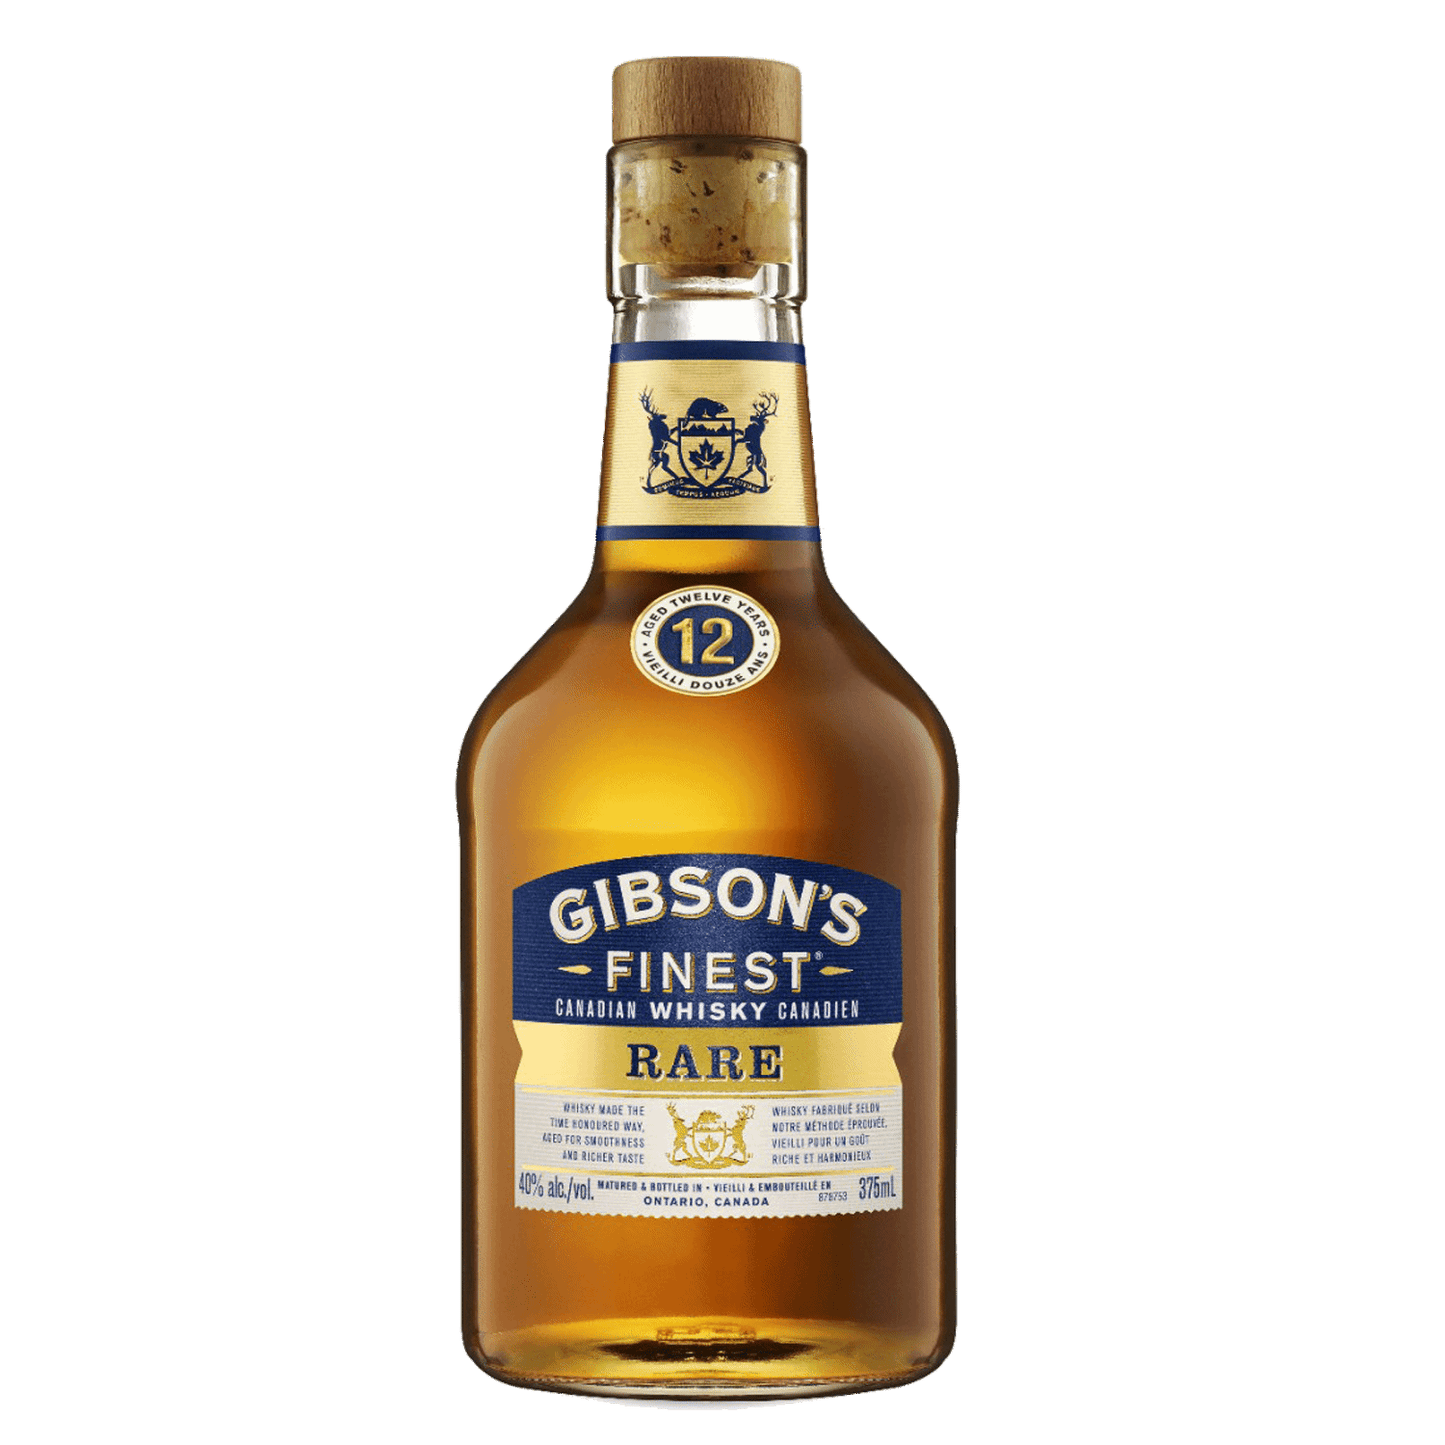 GIBSON'S FINEST RARE 12 YEAR OLD RYE WHISKEY